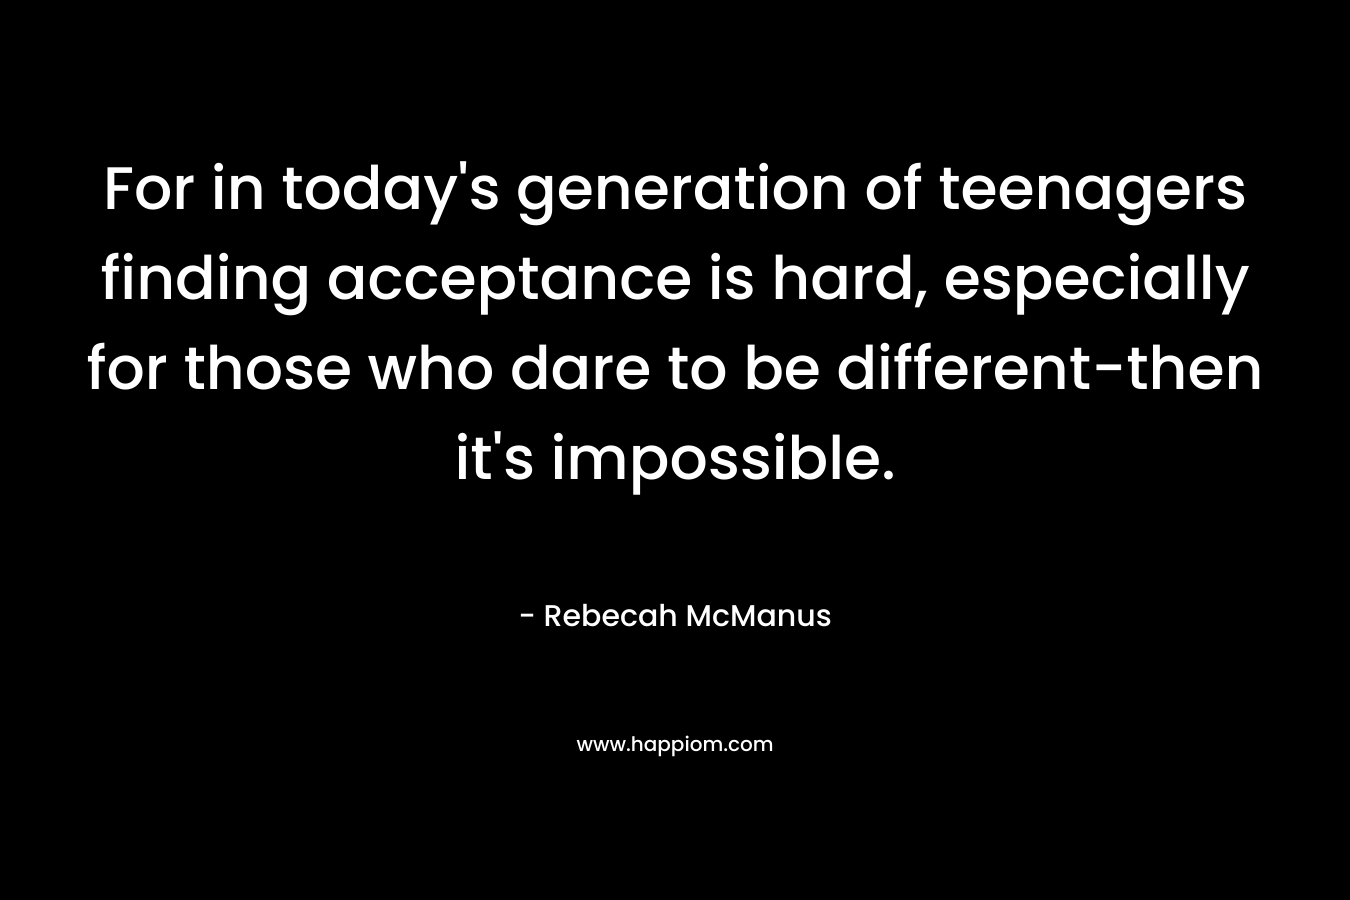 For in today’s generation of teenagers finding acceptance is hard, especially for those who dare to be different-then it’s impossible. – Rebecah McManus